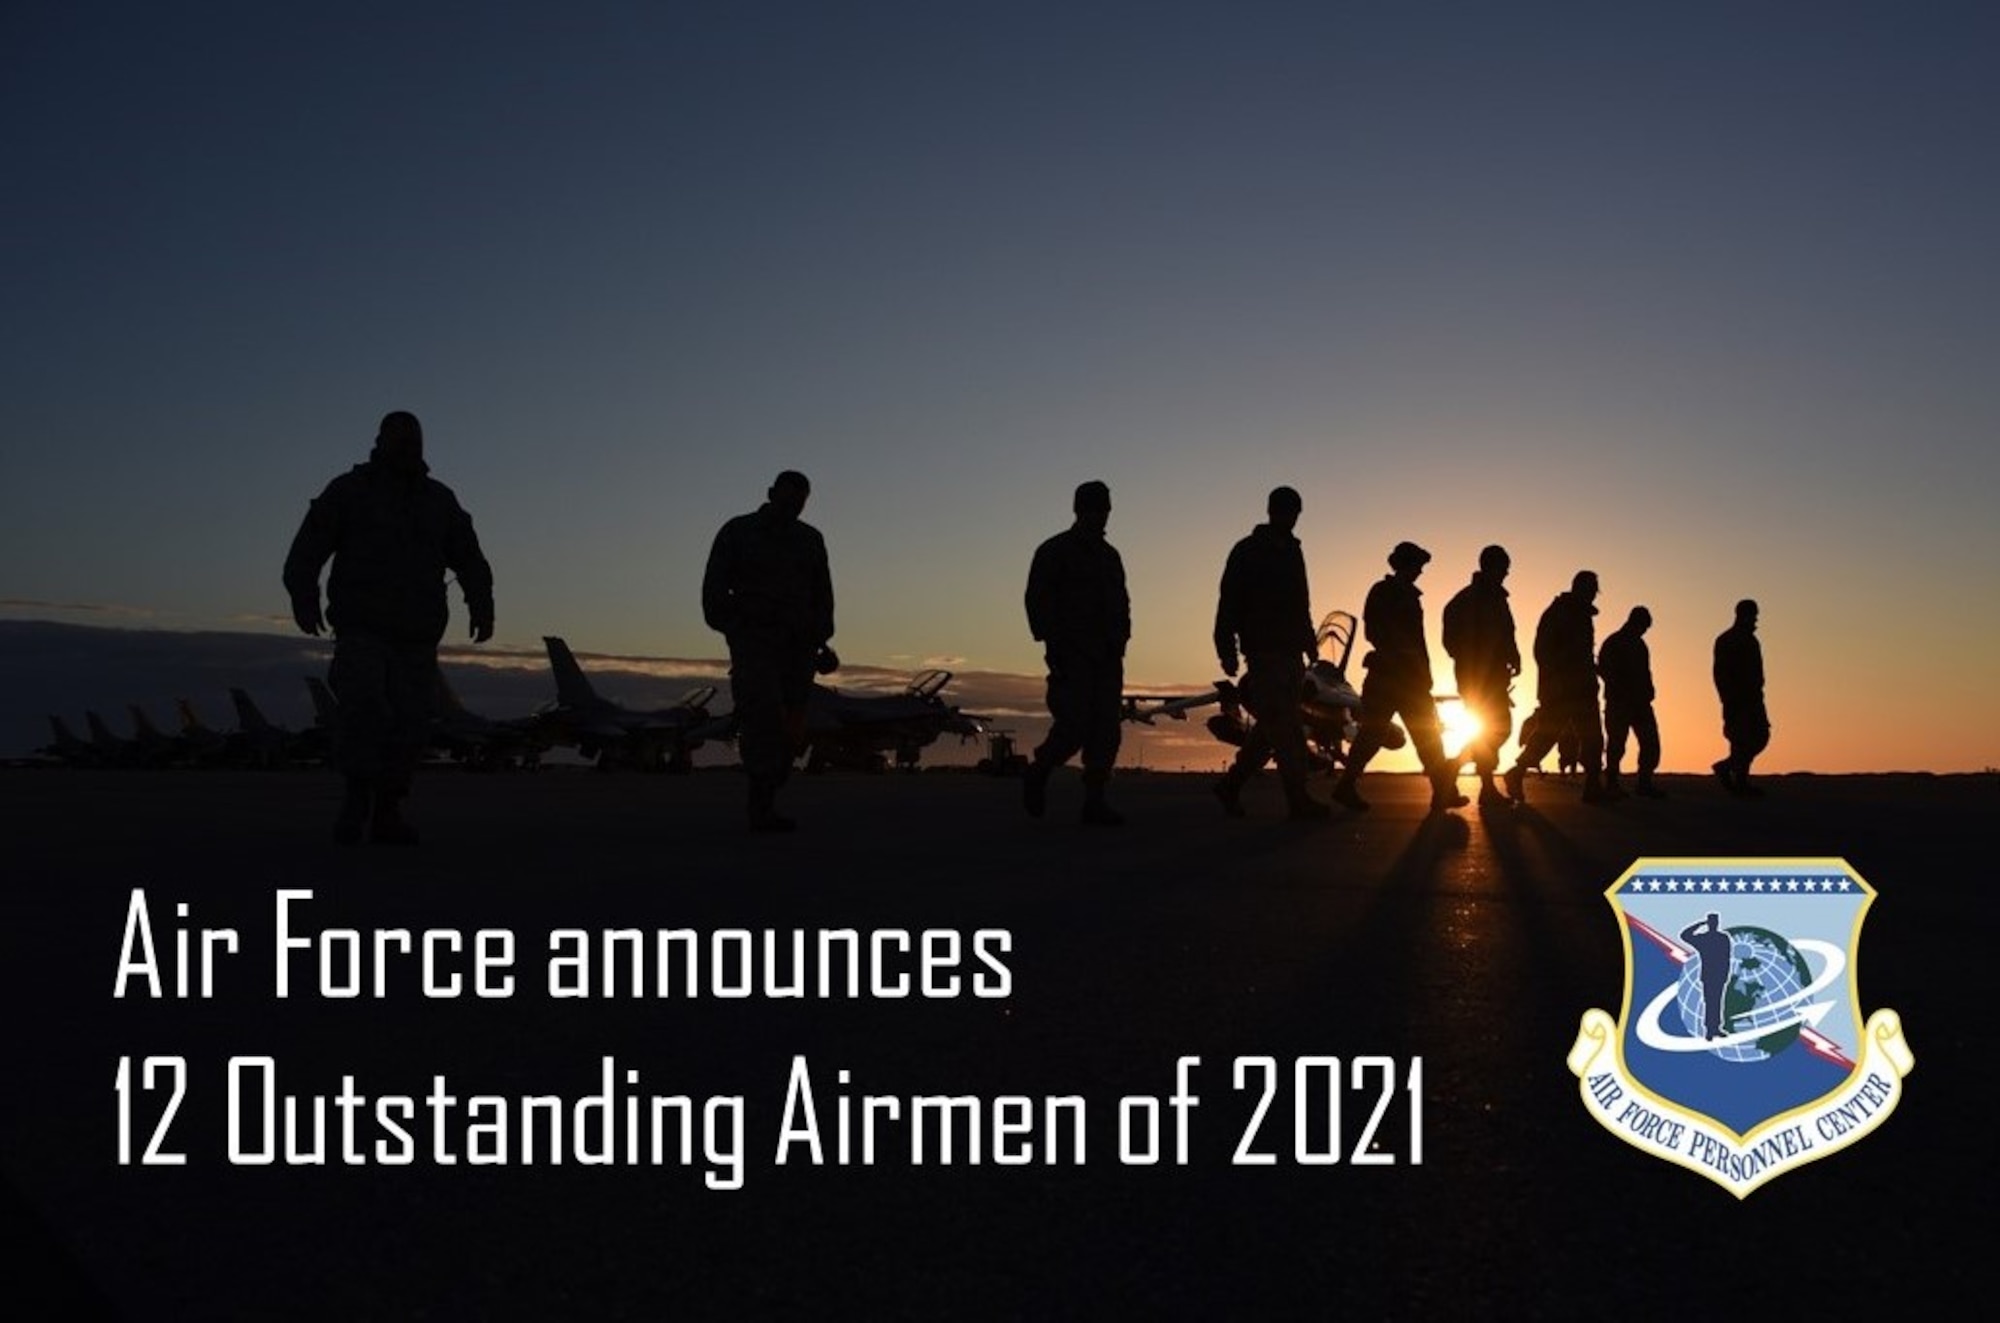 Graphic of a silhouette of Airmen walking across flight line.